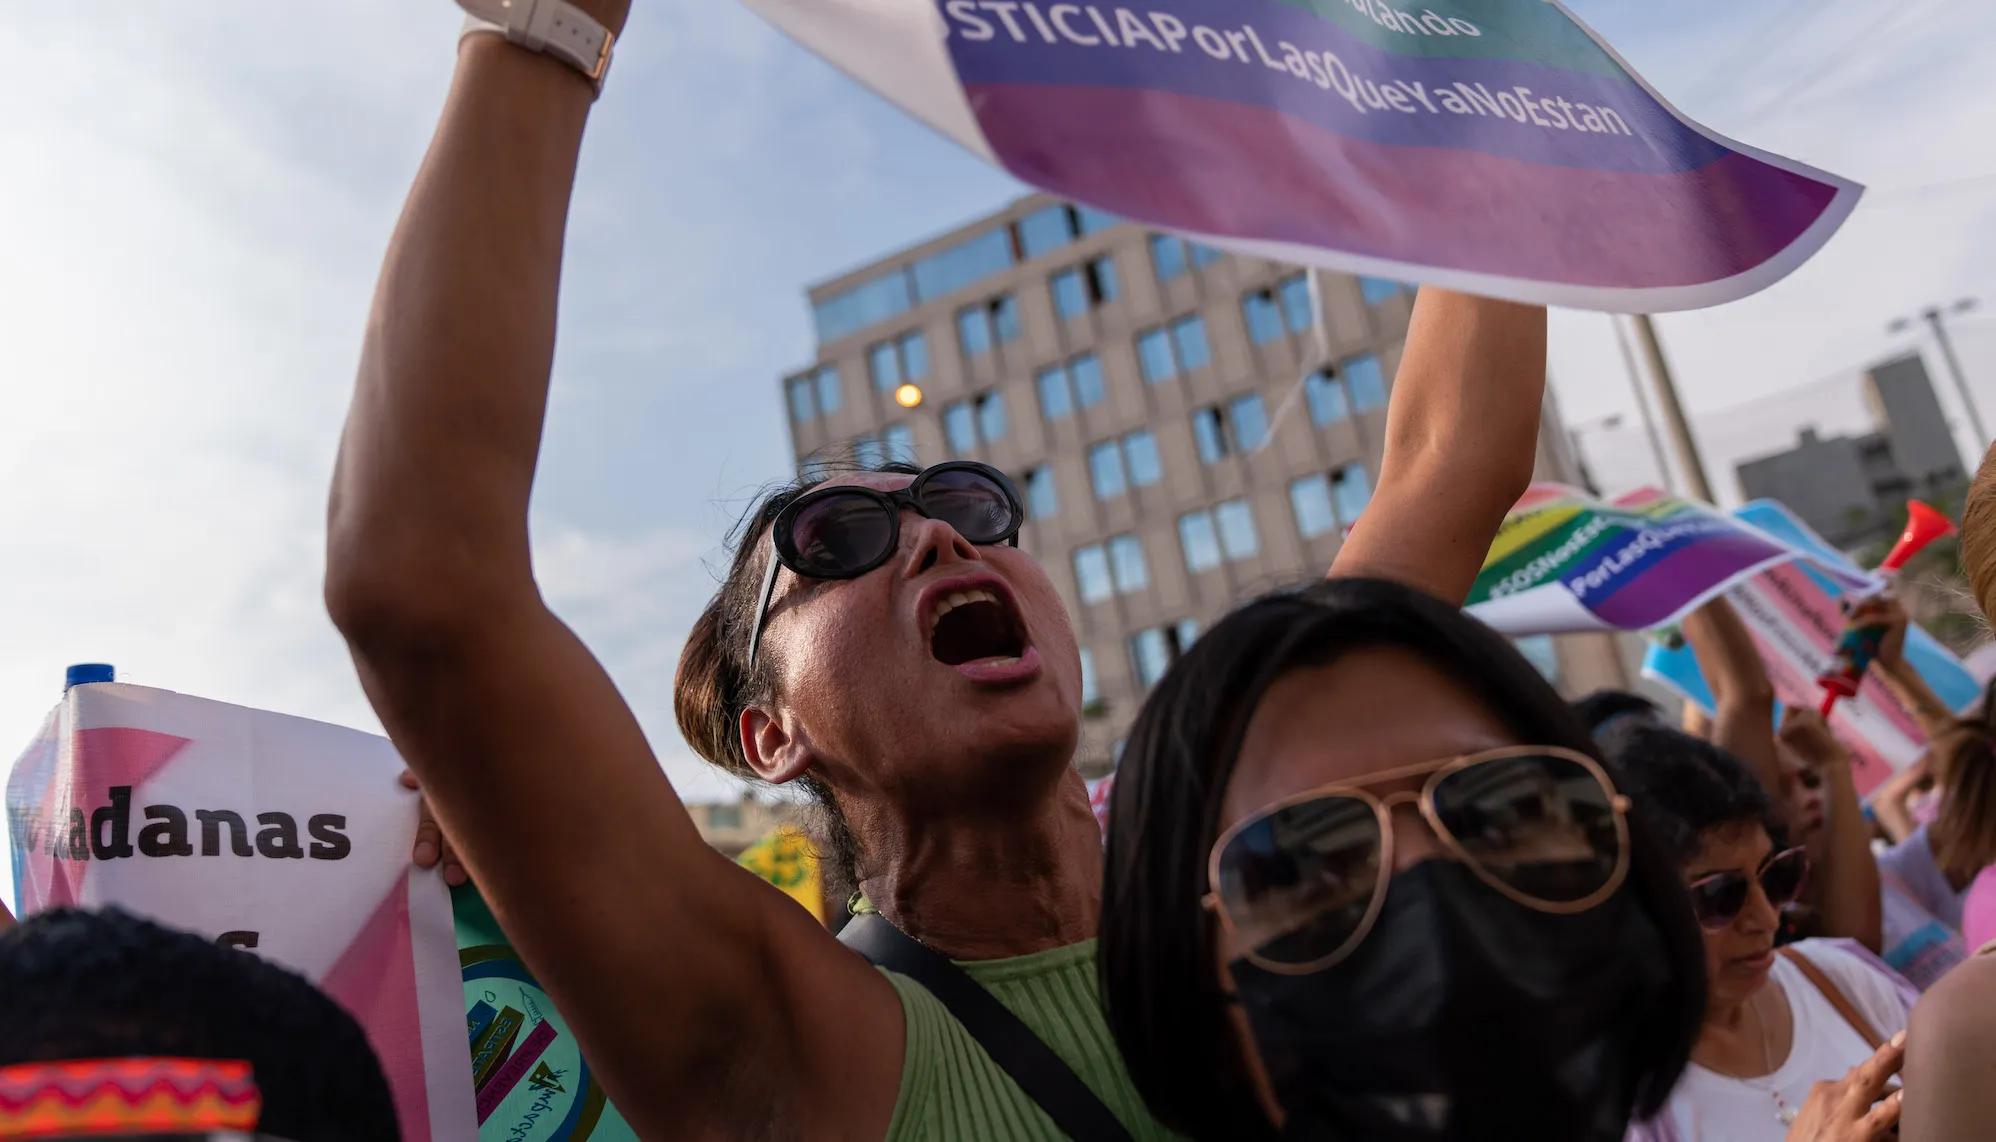 Peru classifies trans people as ‘mentally ill’ after decree [Video]